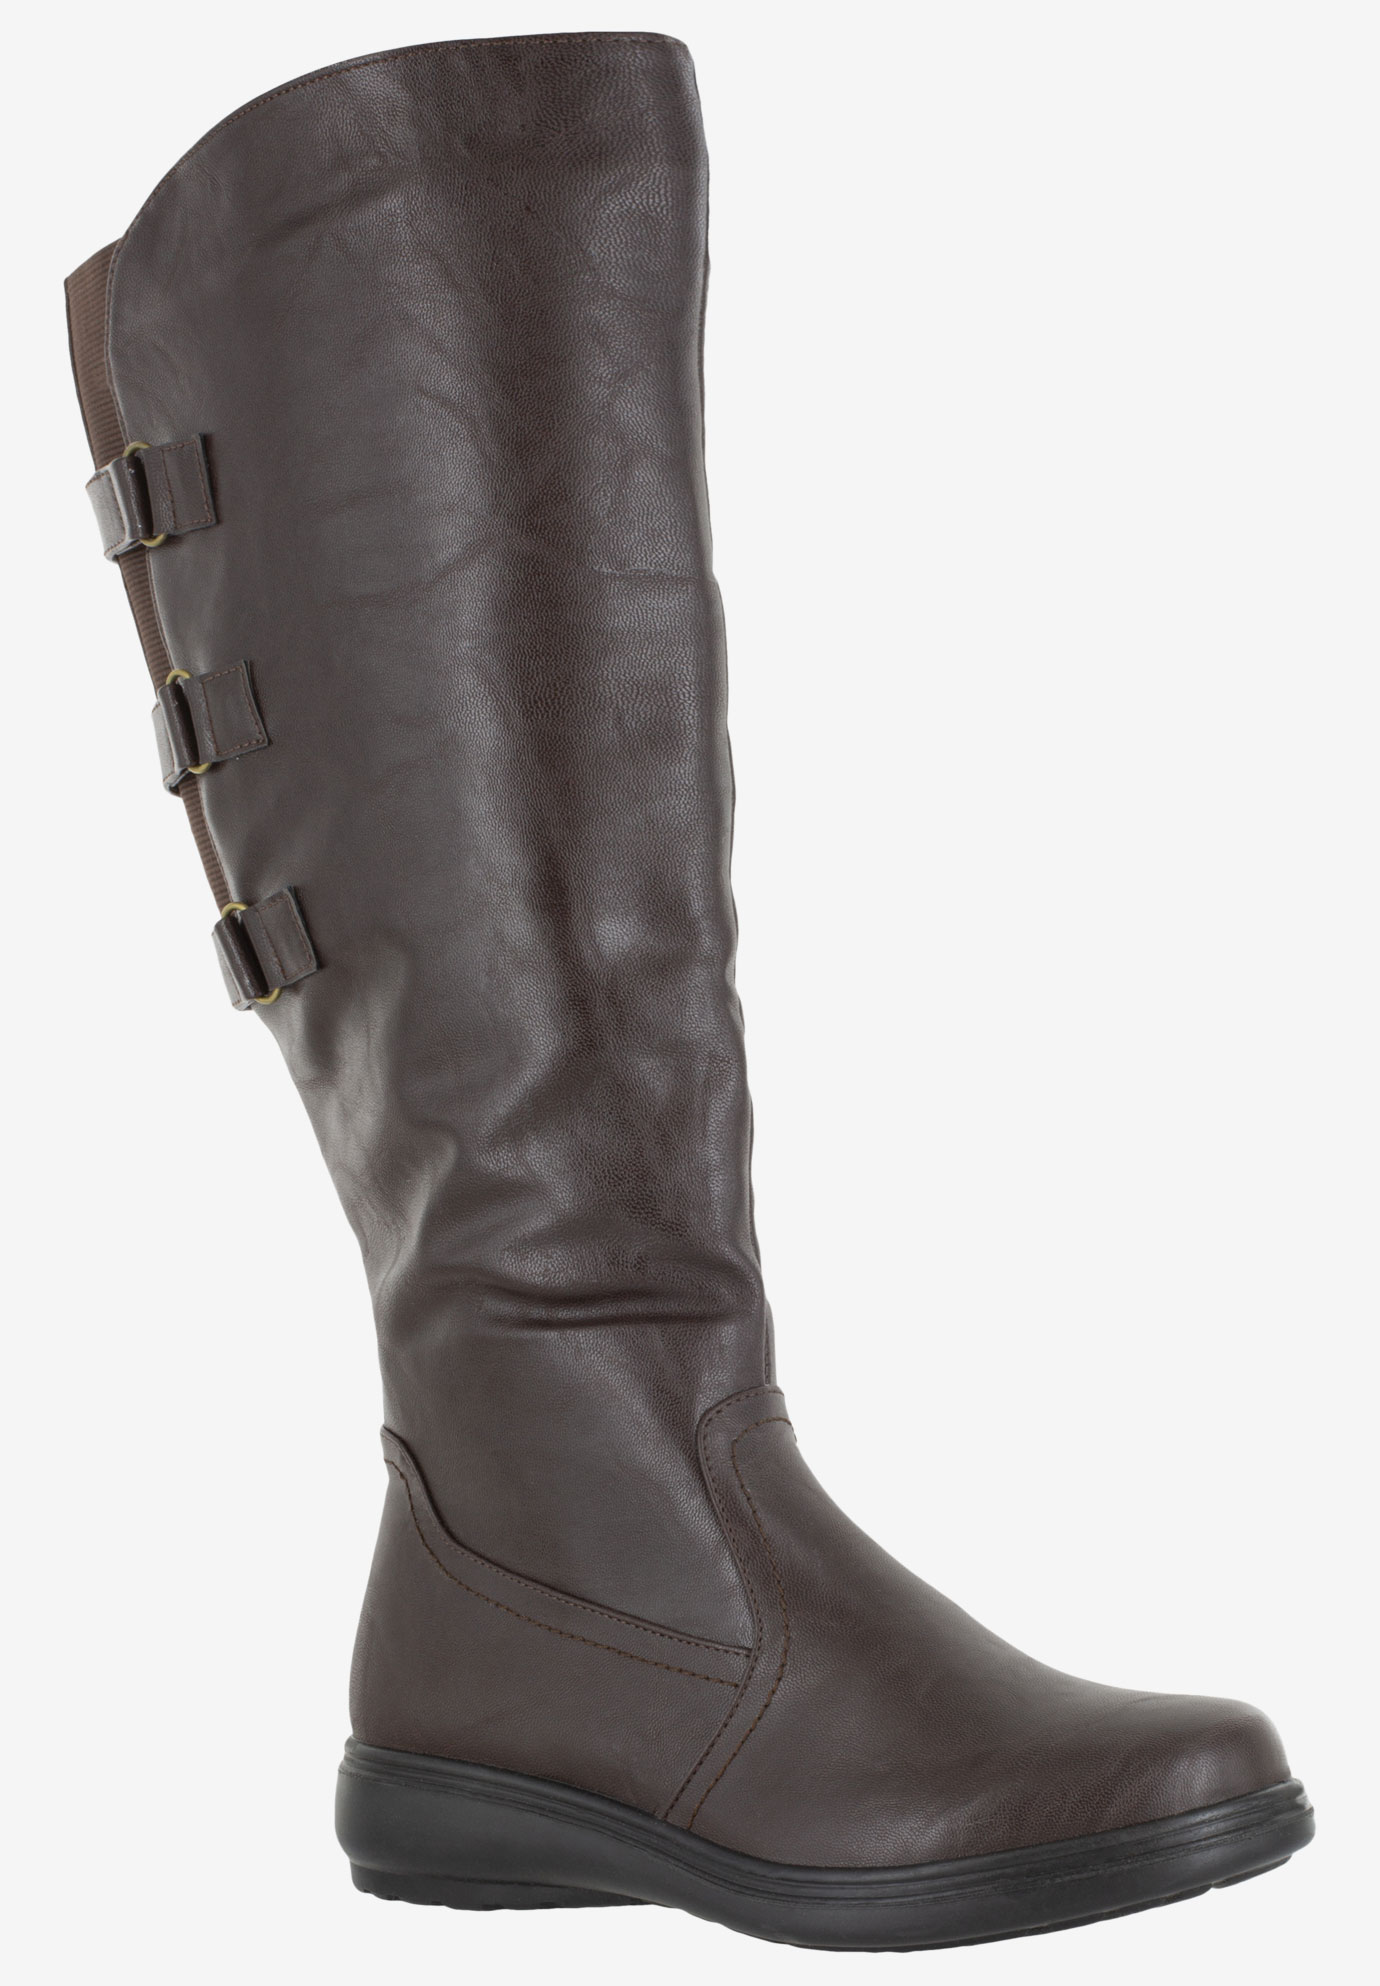 Presley Plus Wide Calf Boot by Easy 